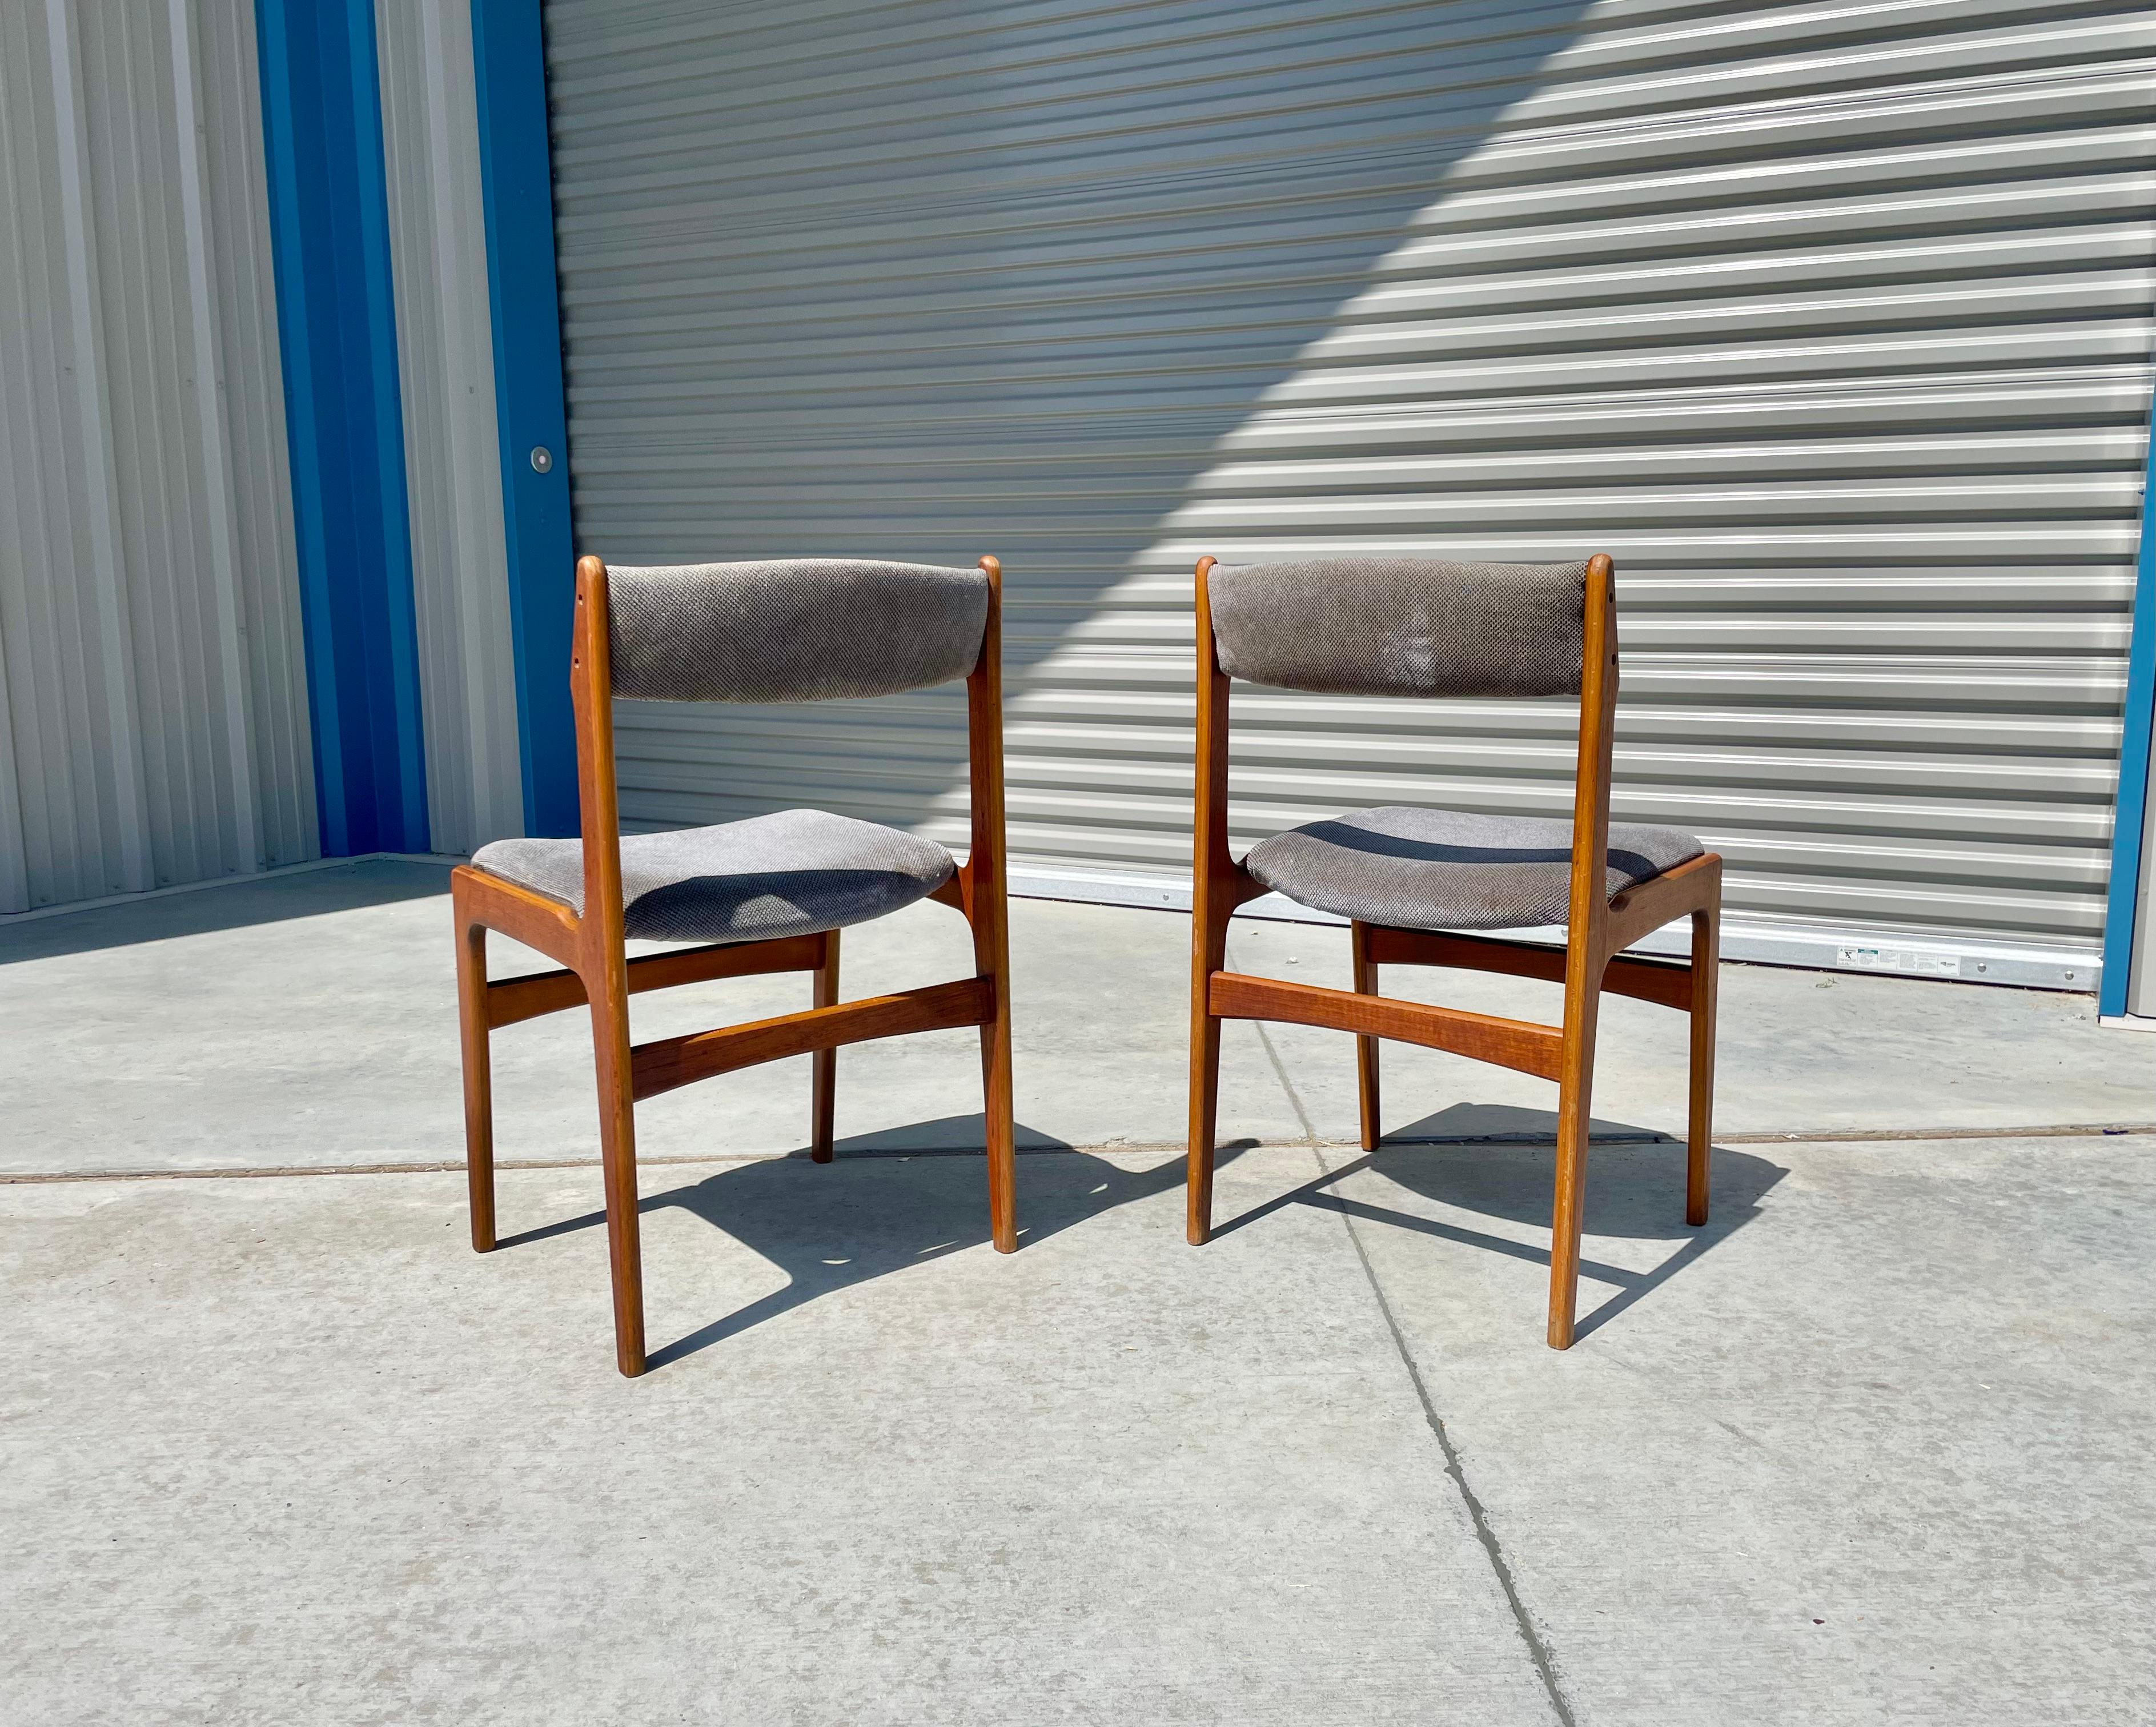 1960s Danish Modern Teak Dining Chairs - Set of 6 For Sale 4